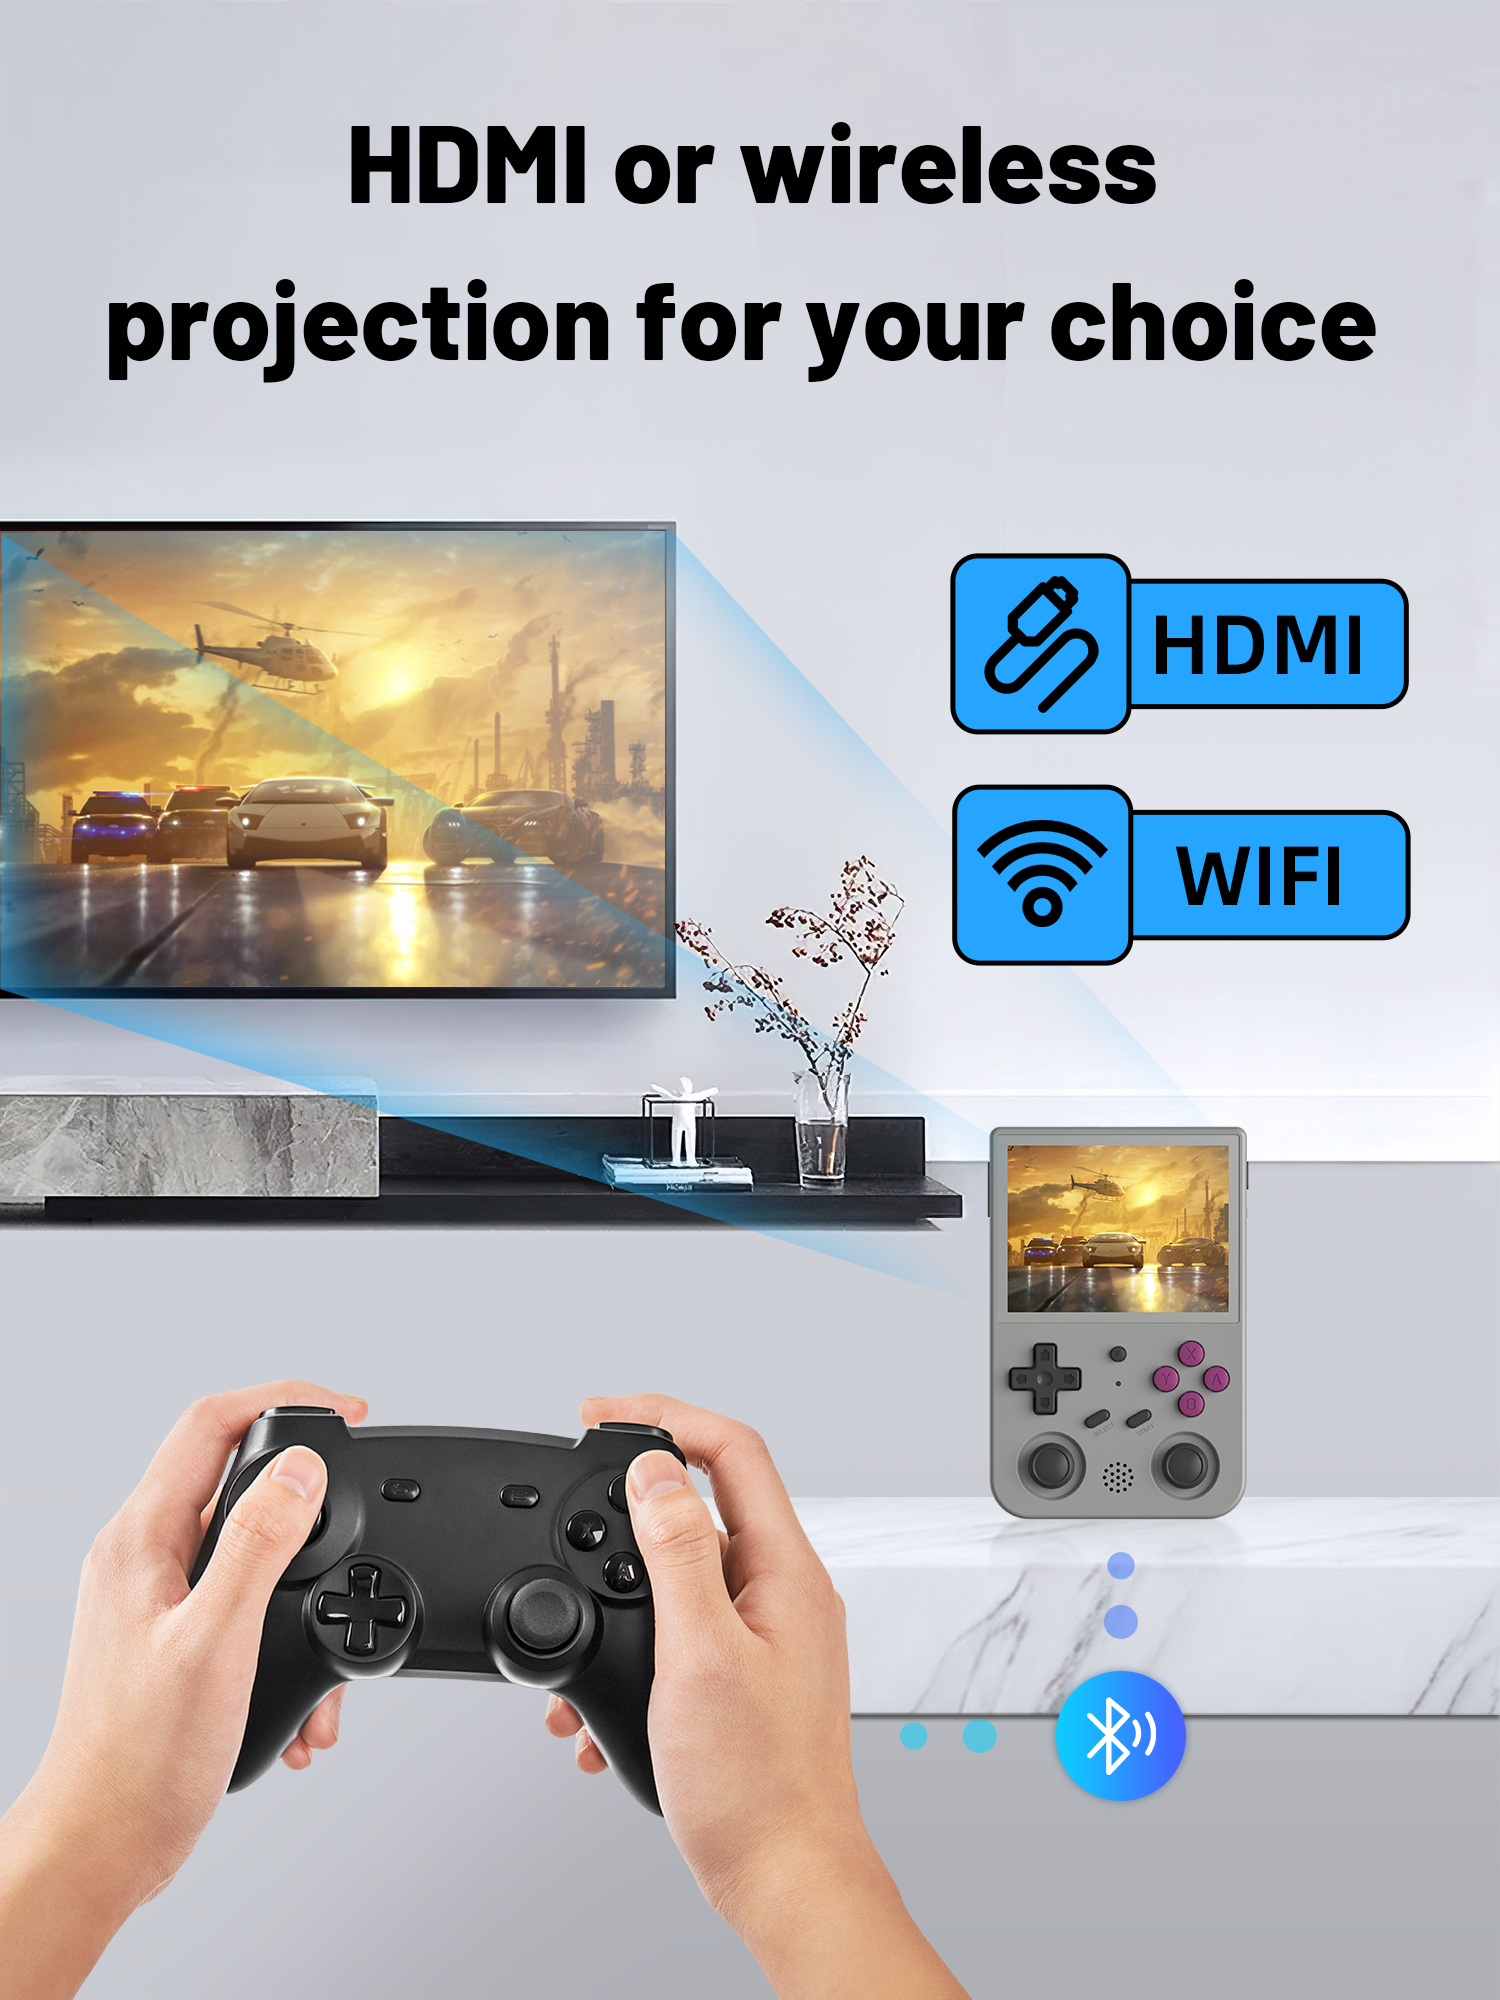 ANBERNIC RG353VS 64GB 15000 Games Linux Dual OS Handheld Game Console for PSP DC SS PS1 NDS N64 MSX 5G WiF BT4.2 3.5 inch IPS Full View Retro Video Game Player